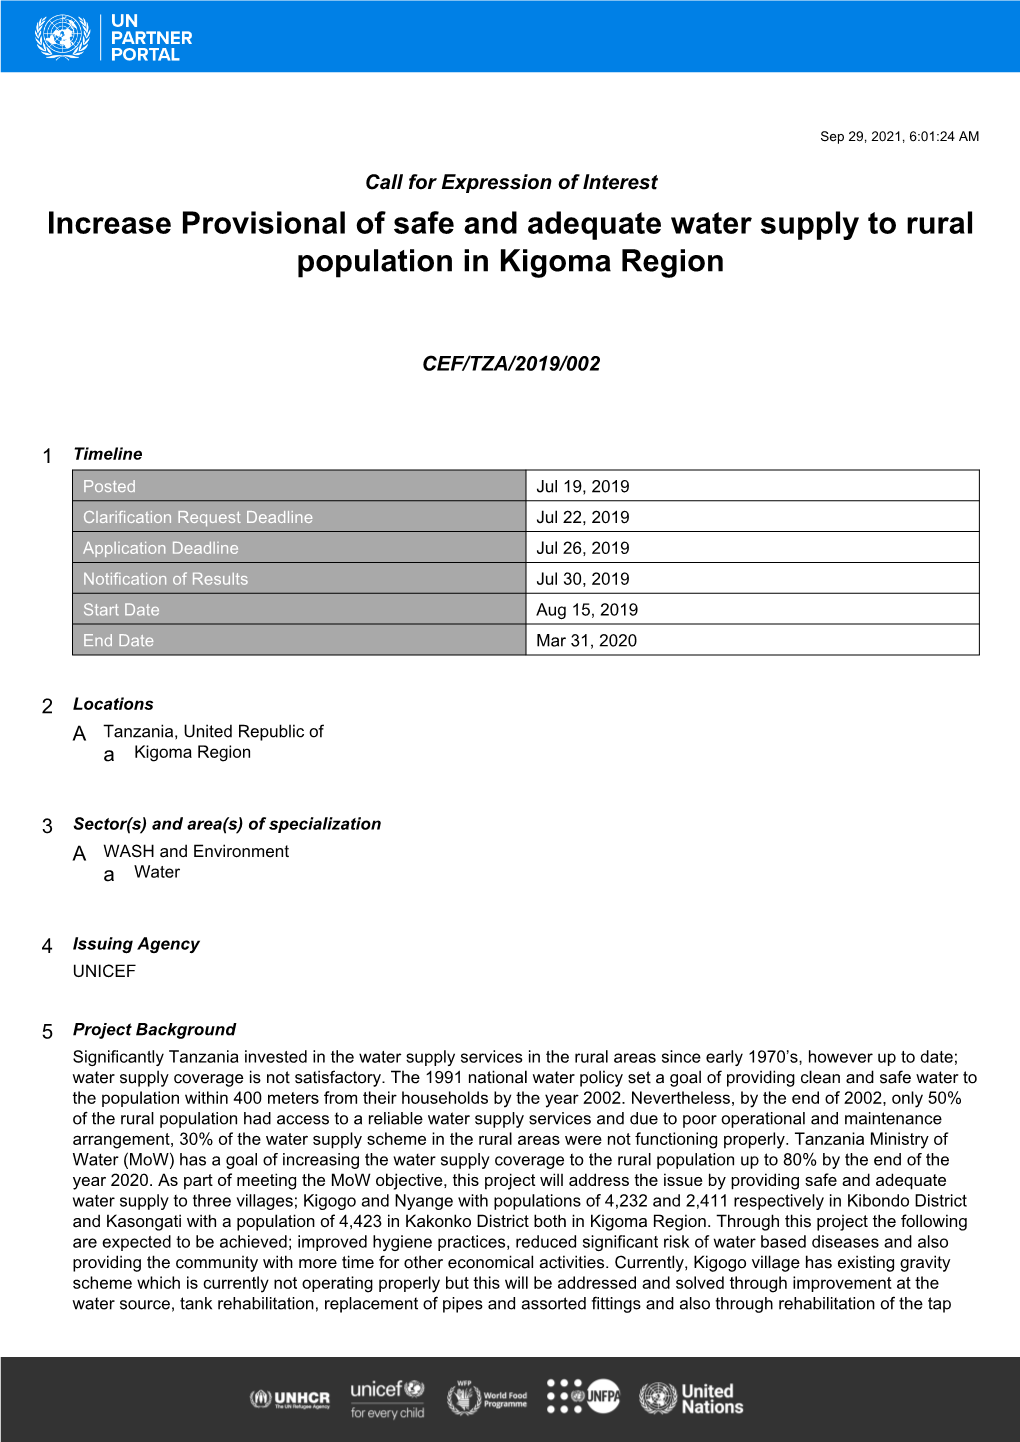 Increase Provisional of Safe and Adequate Water Supply to Rural Population in Kigoma Region